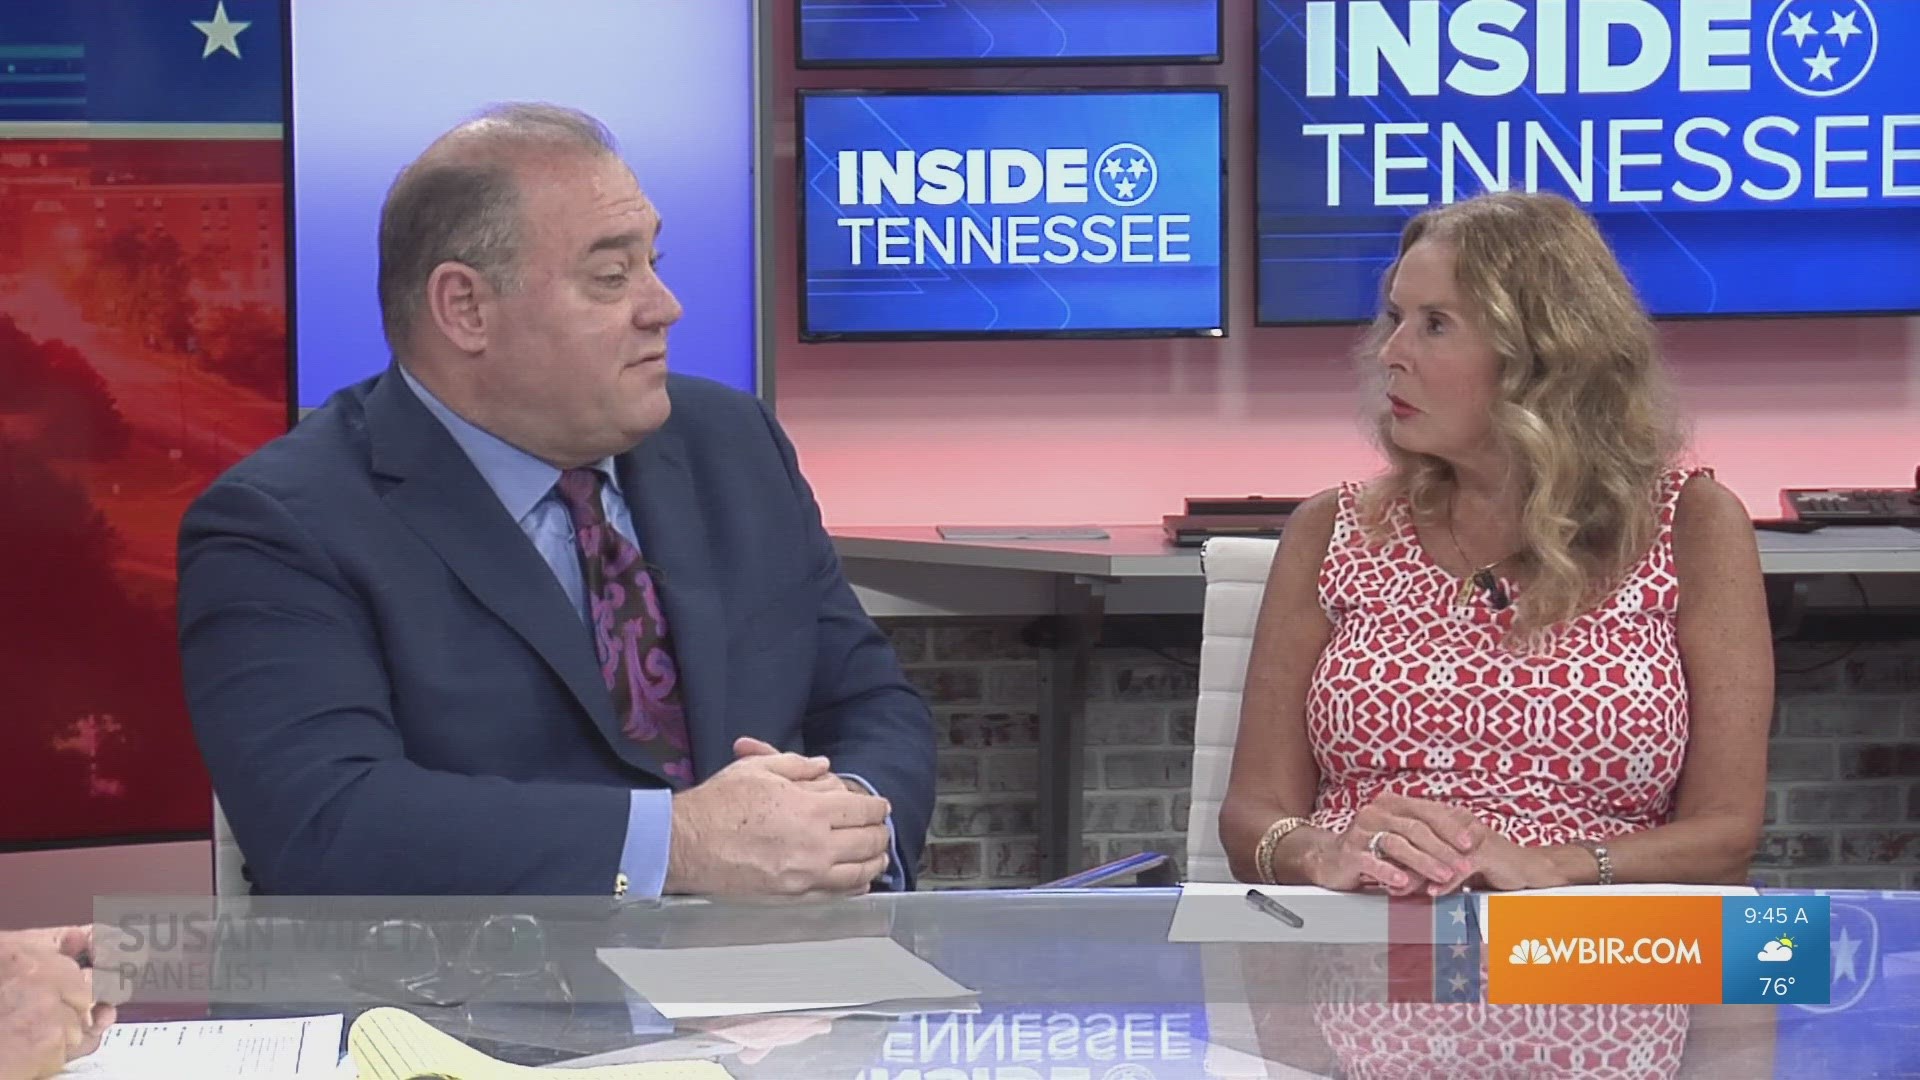 WBIR's panel talks about the Knoxville election and the ongoing special session.